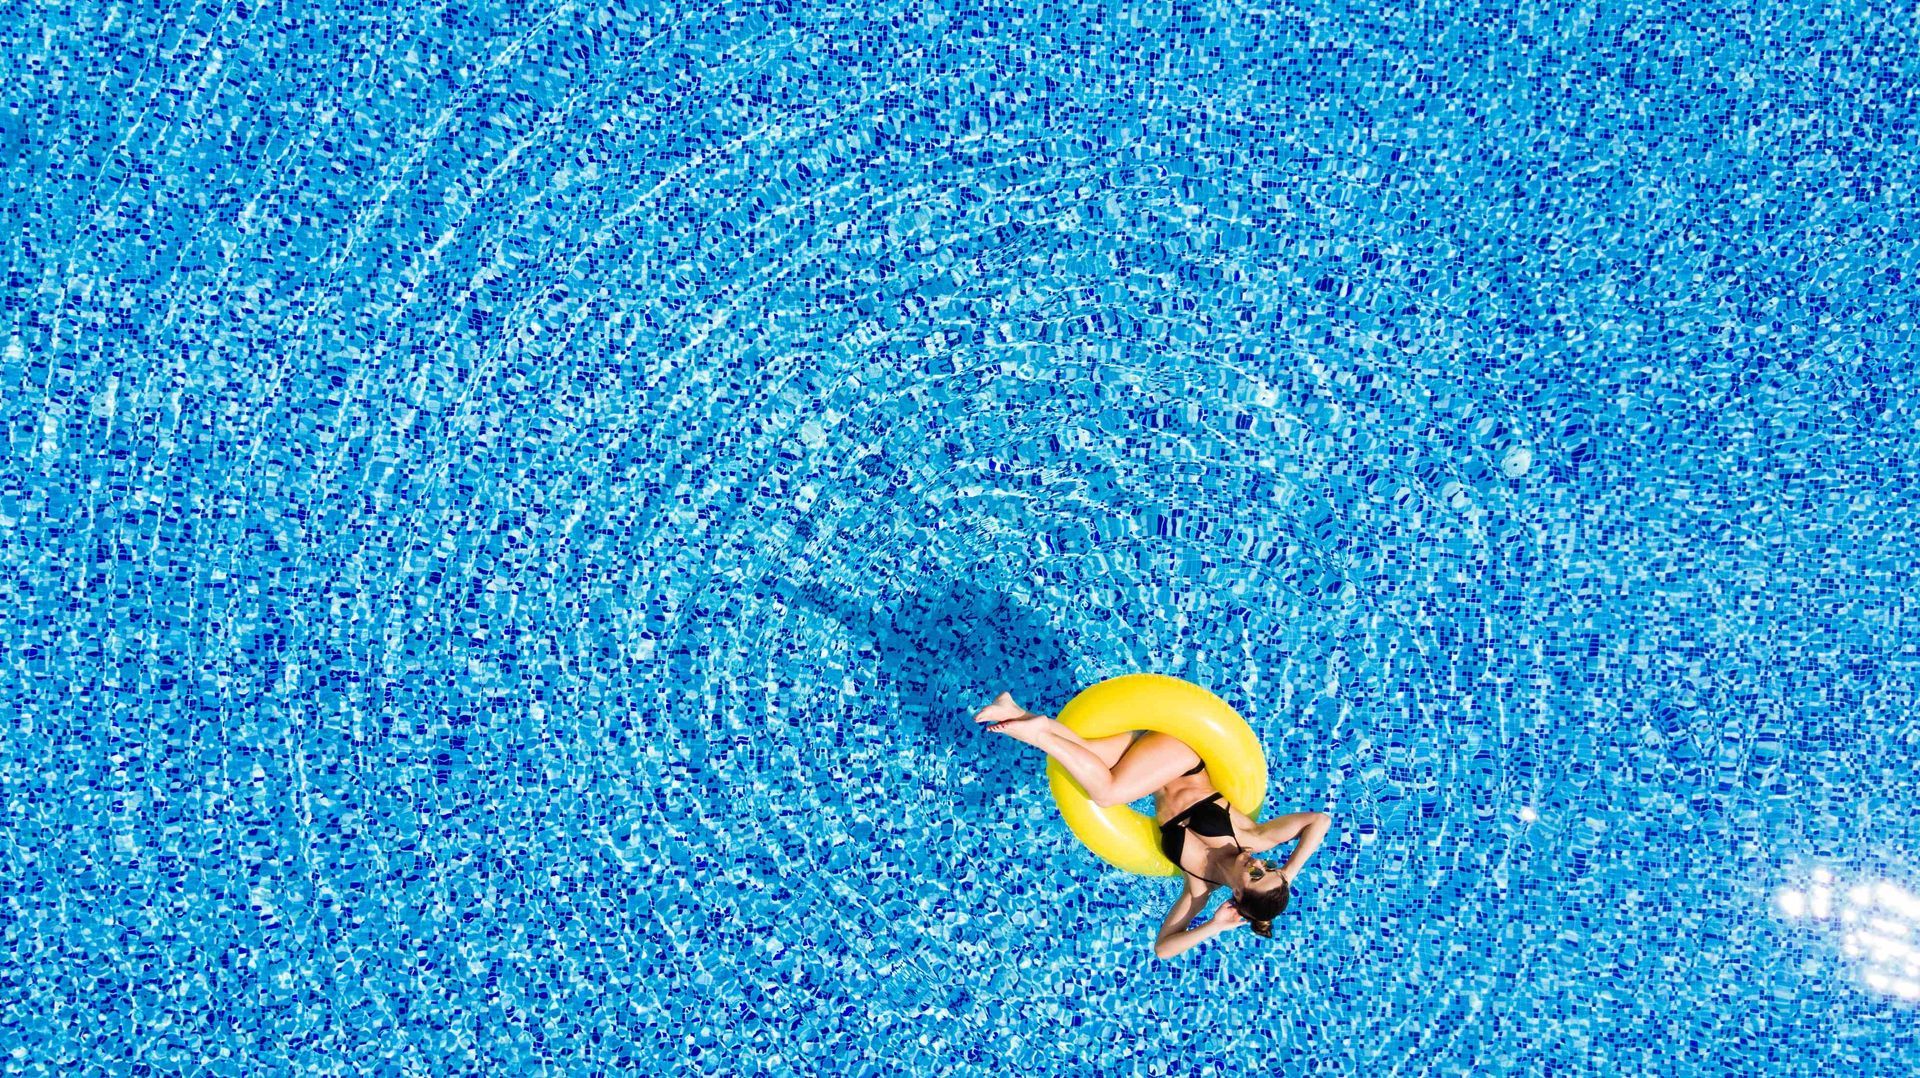 A woman on a yellow intertube floating in a pool